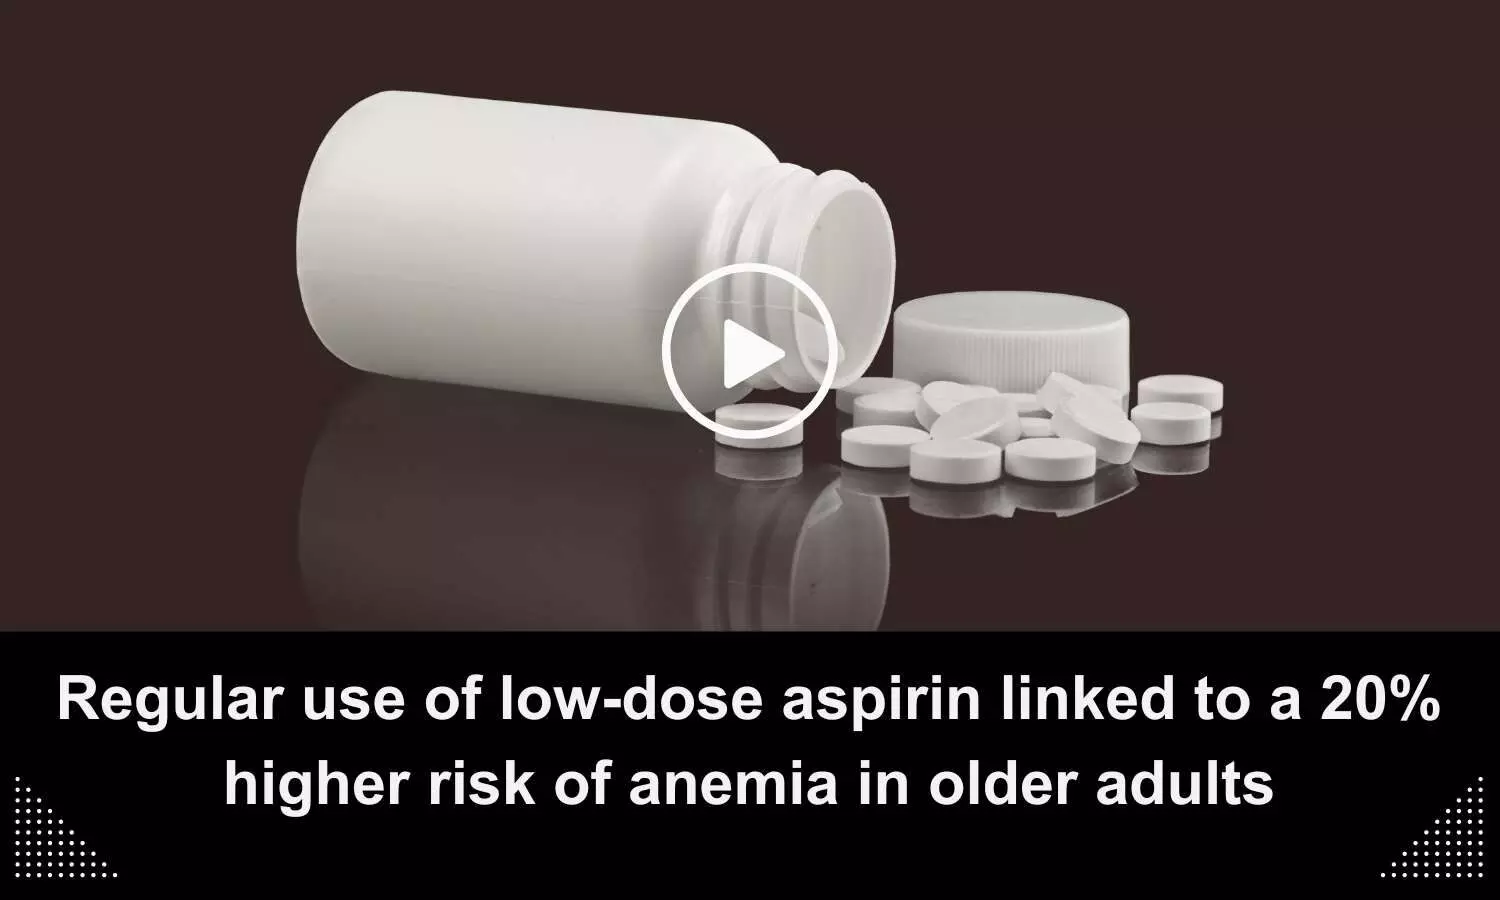 Regular use of low-dose aspirin linked to a 20% higher risk of anemia in older adults